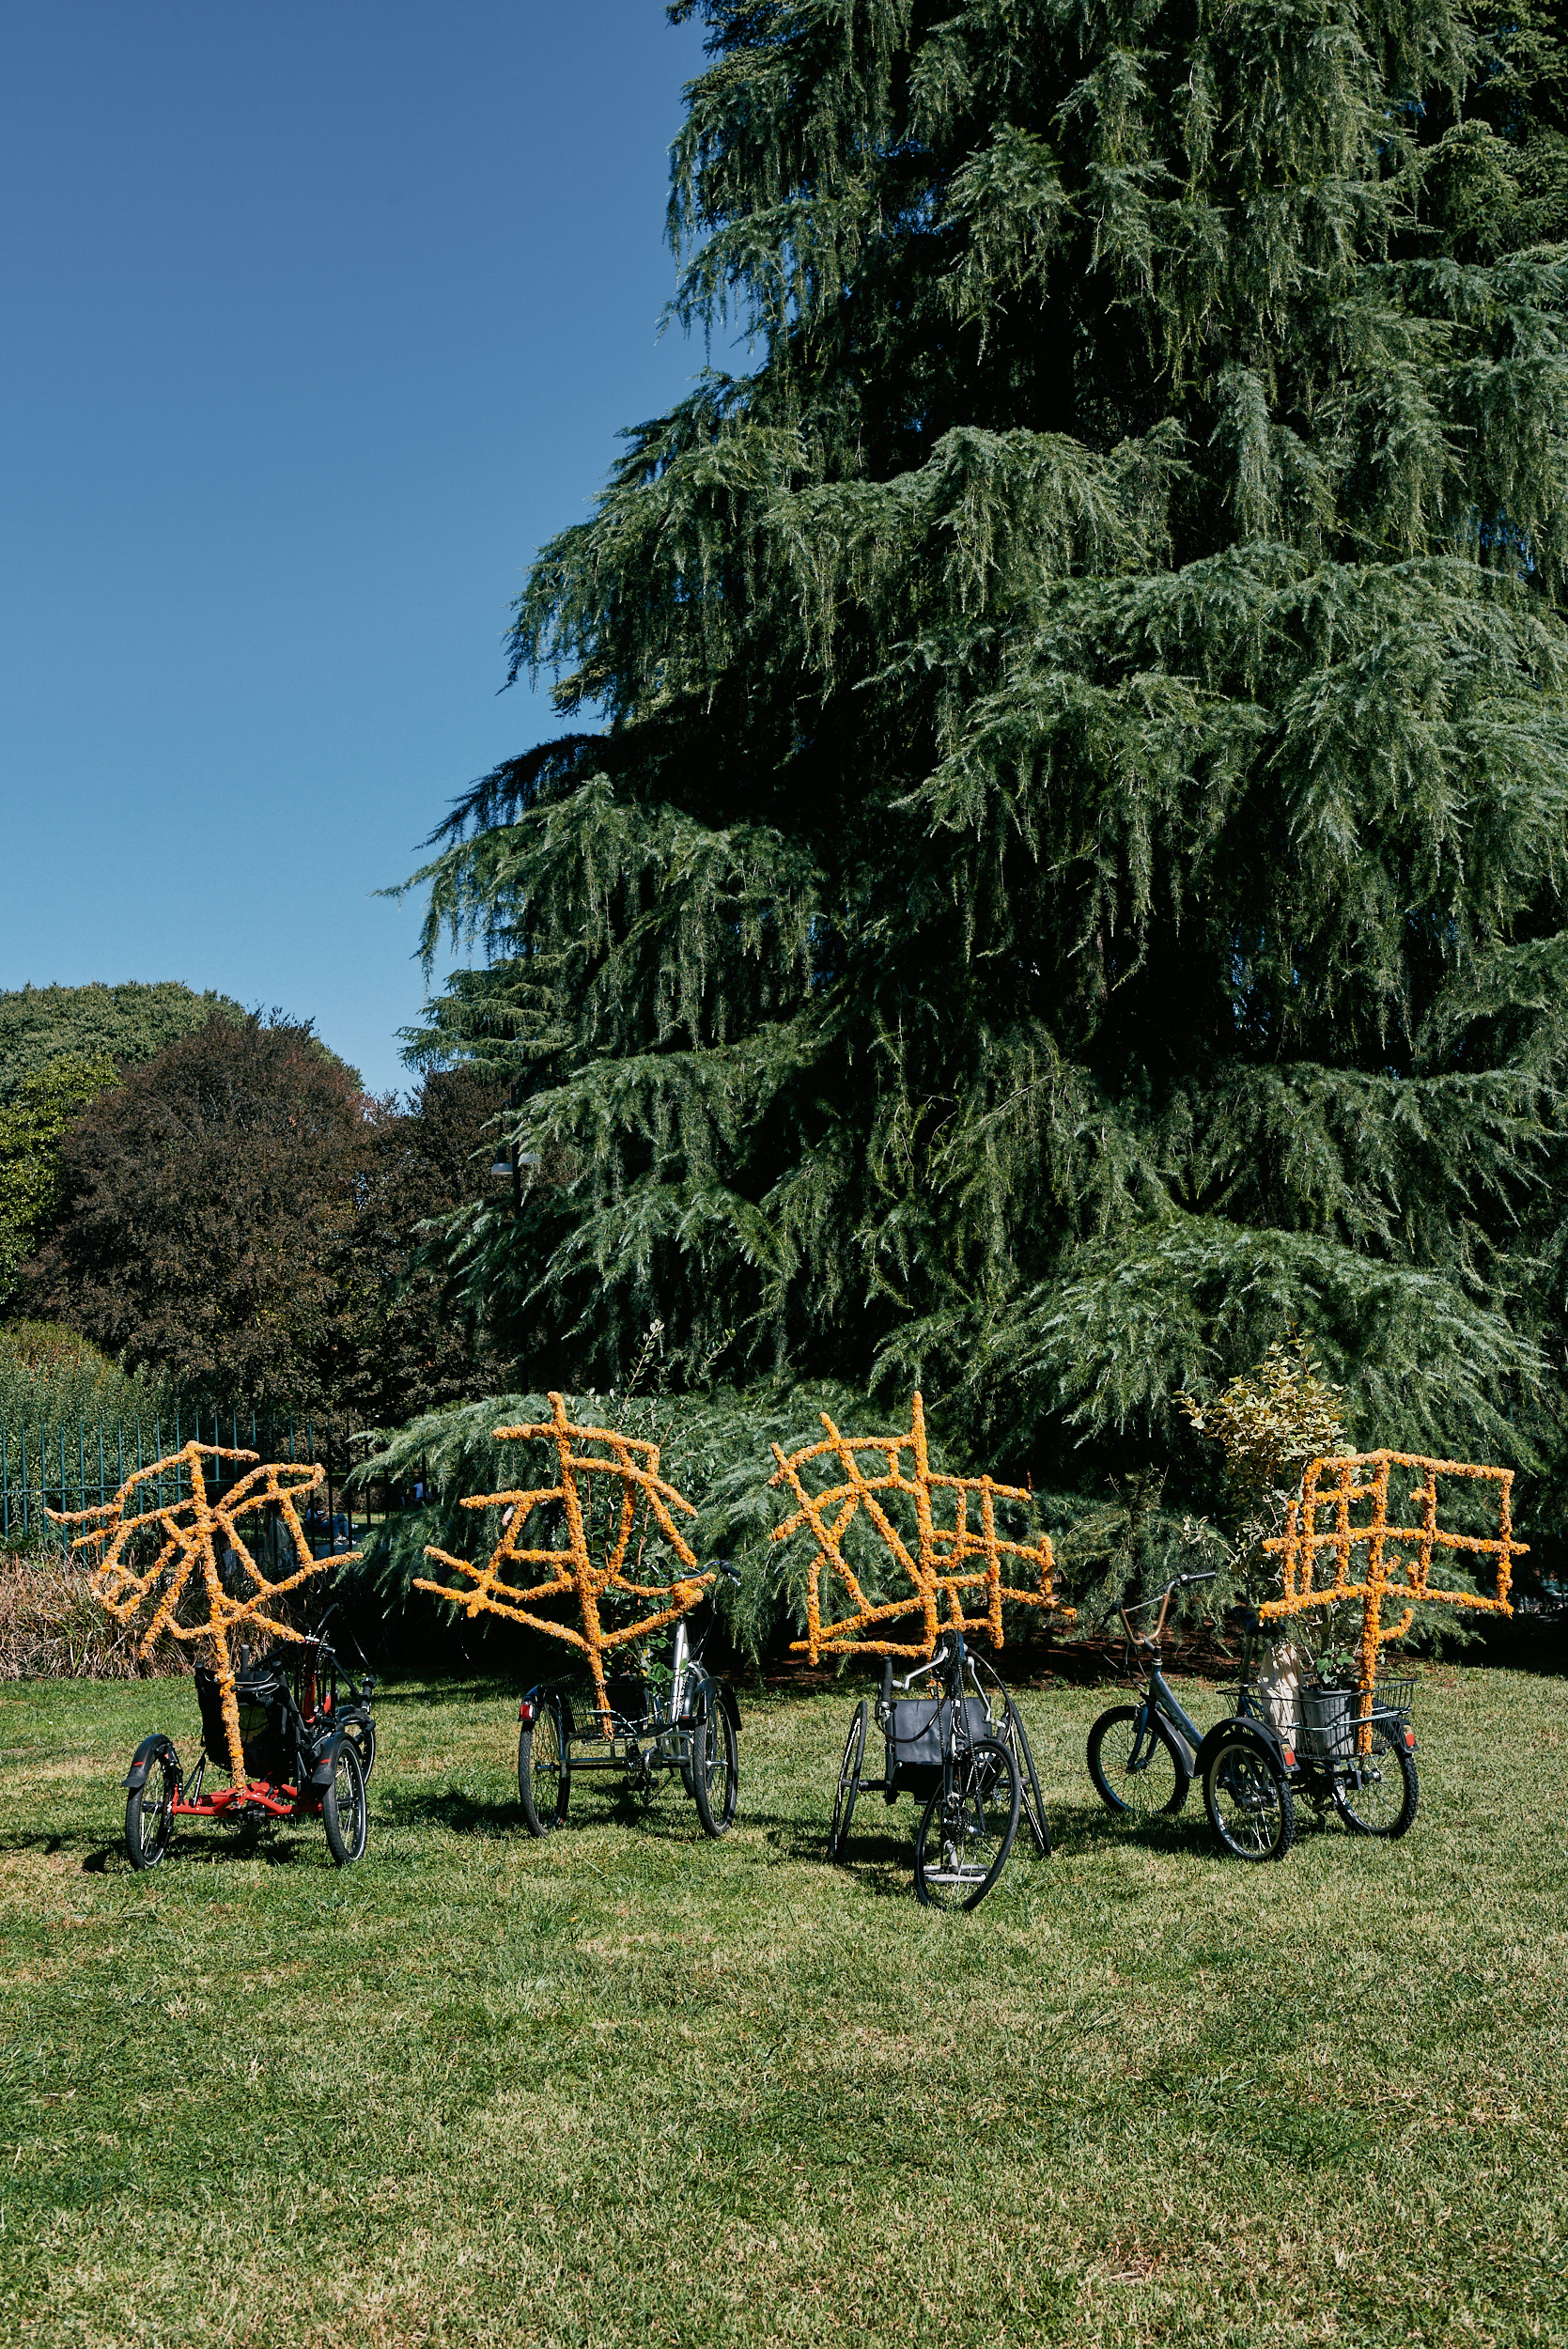 Giuseppina Giordano, I'M (NOT) A TREE #freedomofmovement,Performance, special bikes (handbikes, tricycles), trees and 4 calendula flower sculptures